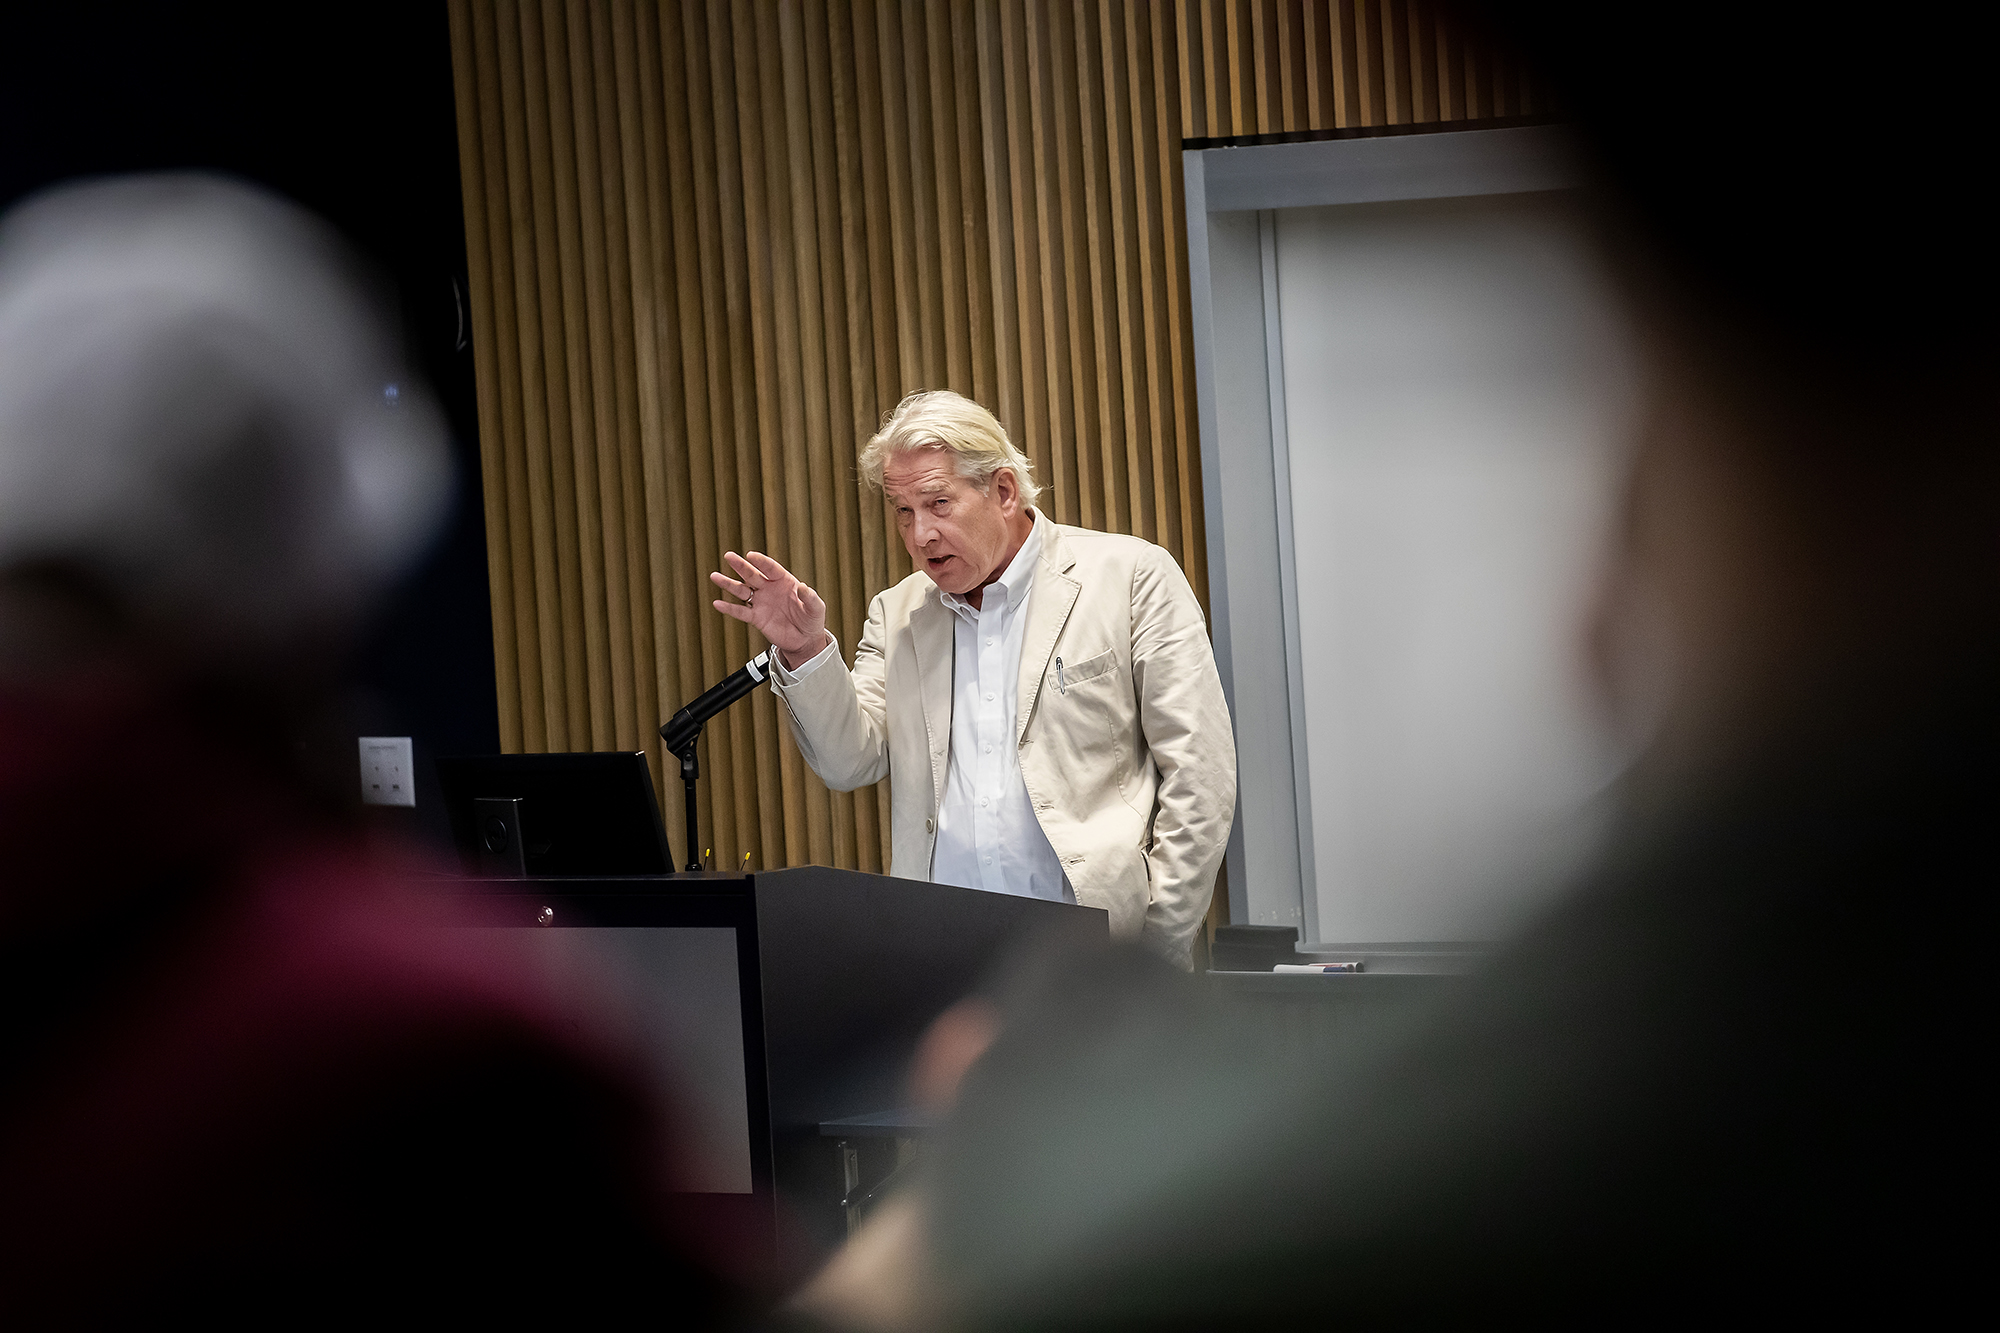 Tor Wennesland gestures as he speaks to an audience at the University of Pennsylvania